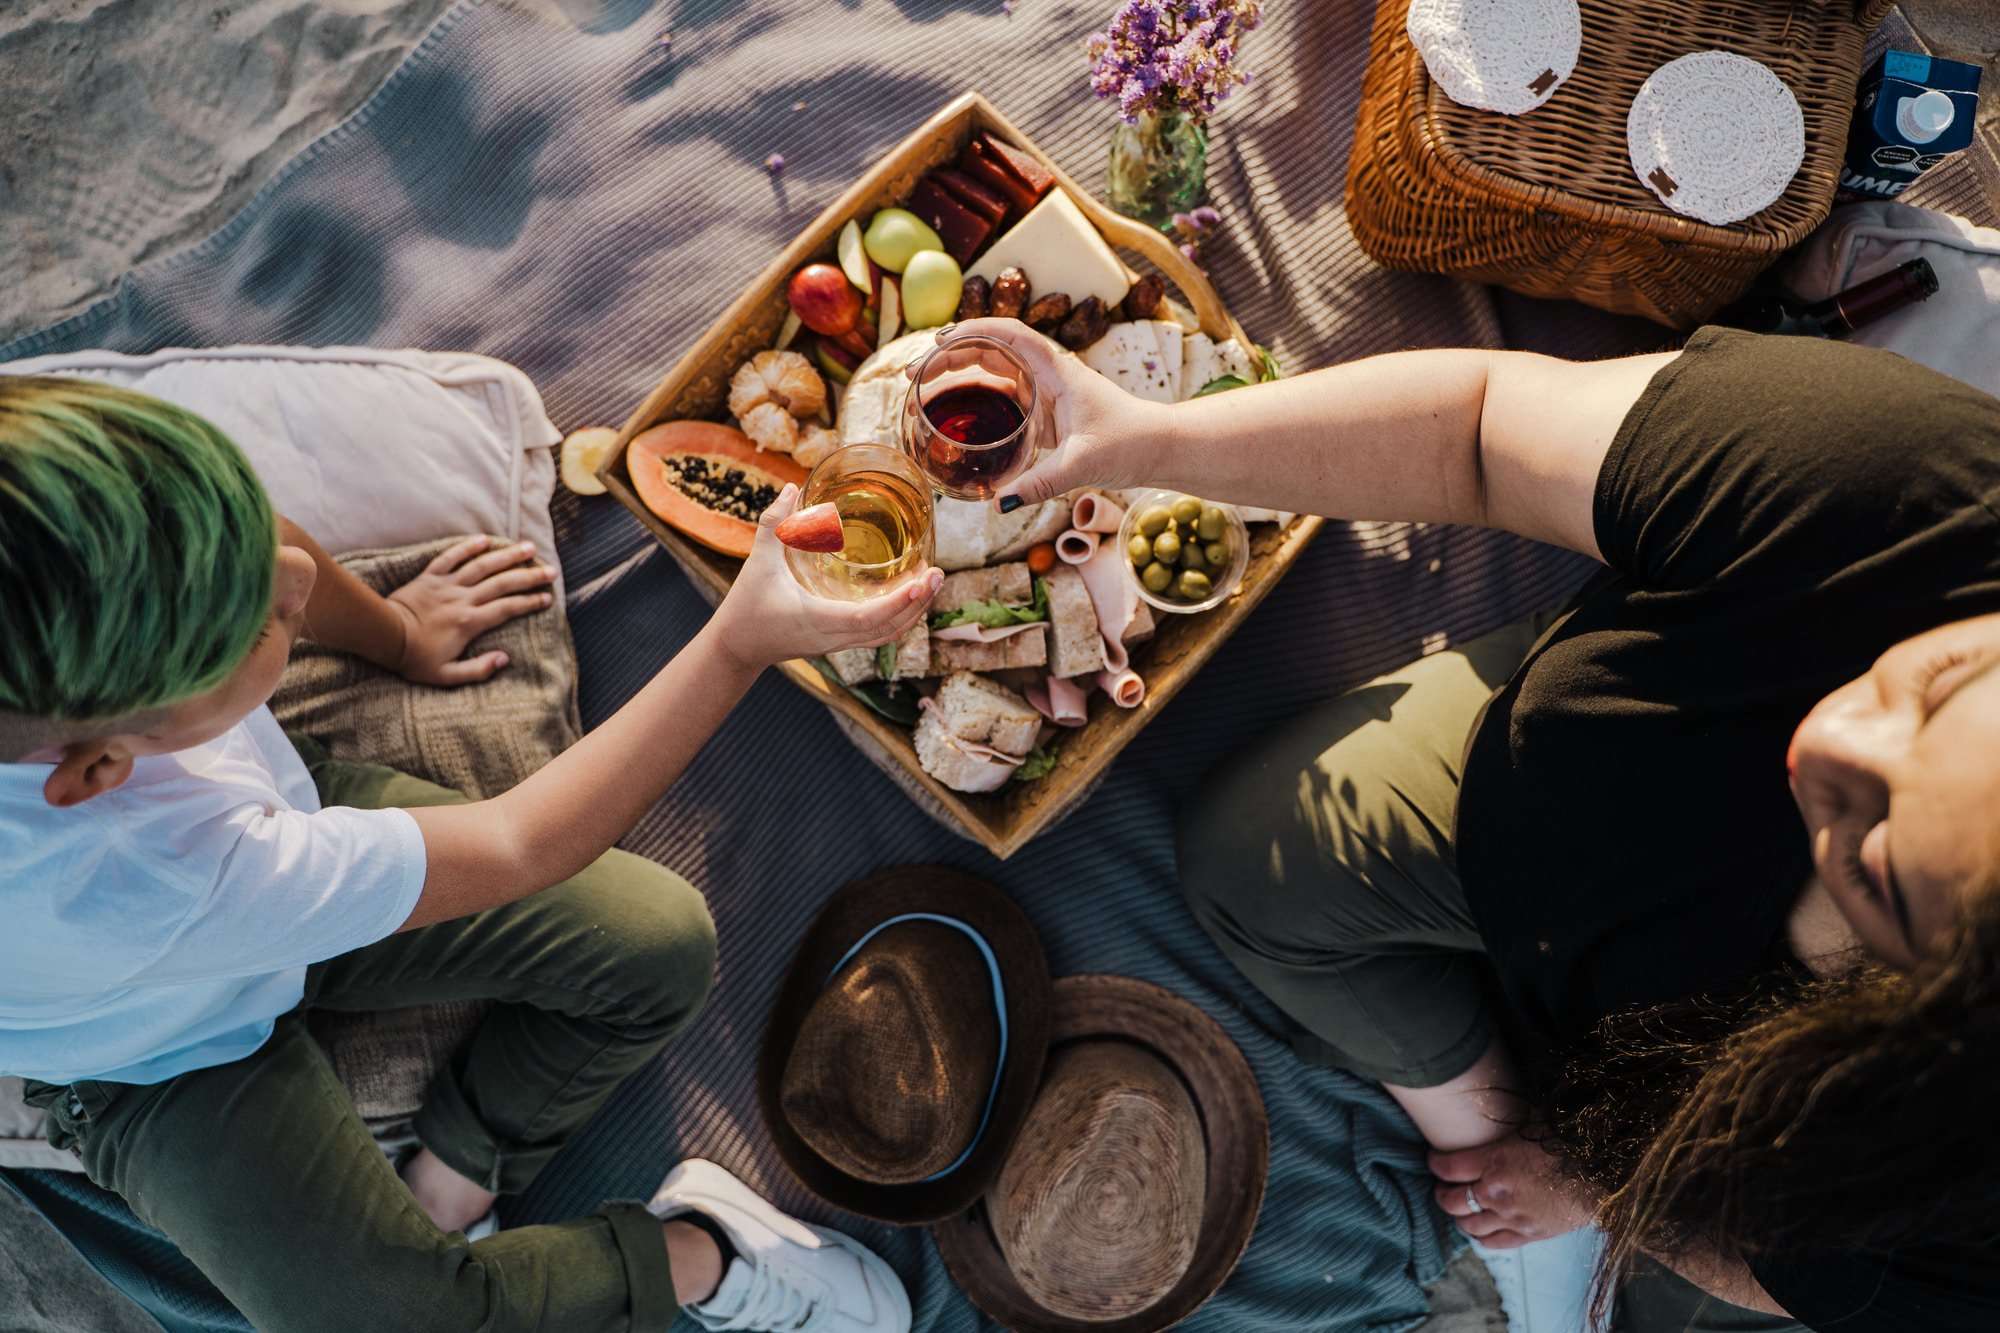 Catered Picnics: How To Plan The Perfect Summer Picnic